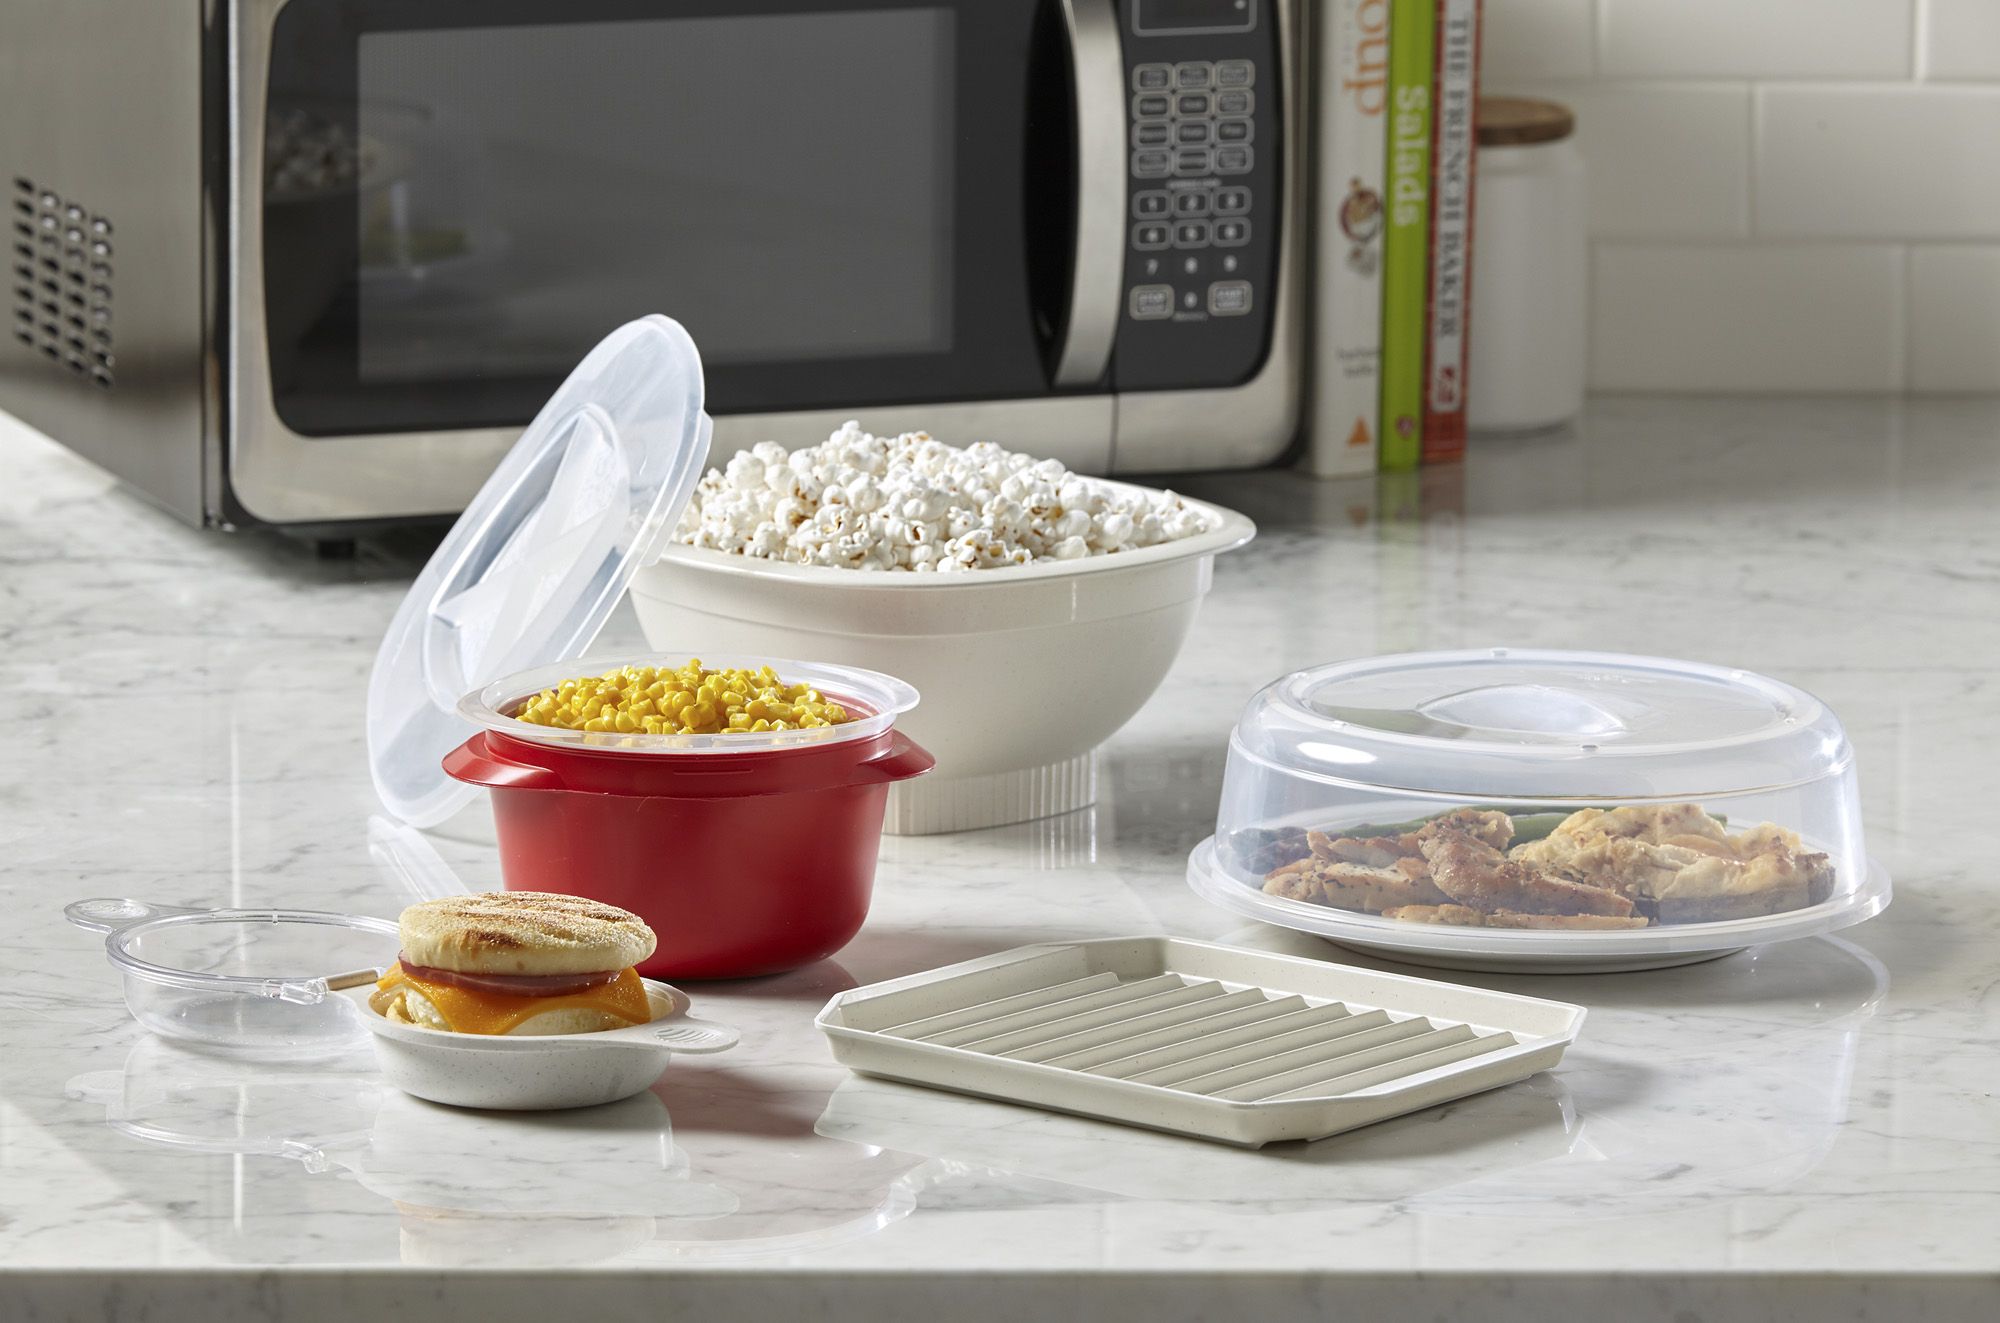 Sells Nordic Ware Microwave Cookware